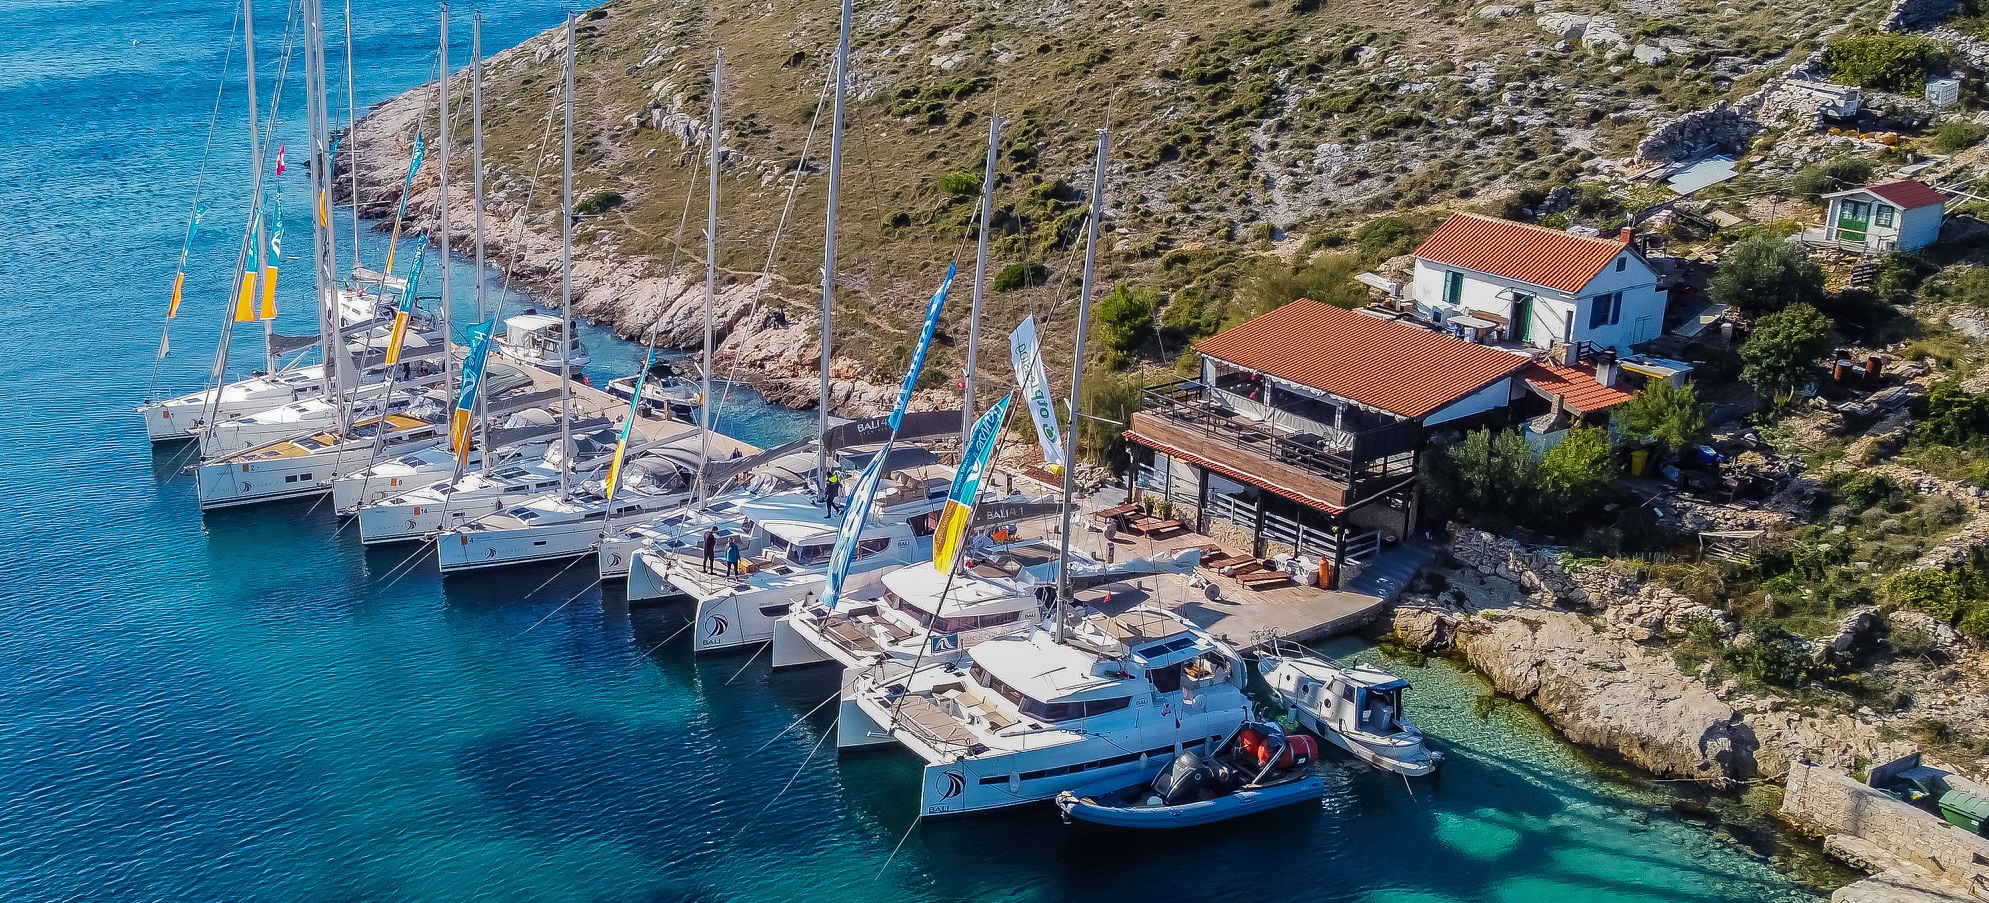 Trogir Sailing Route: Plan Your Perfect Holiday at Sea